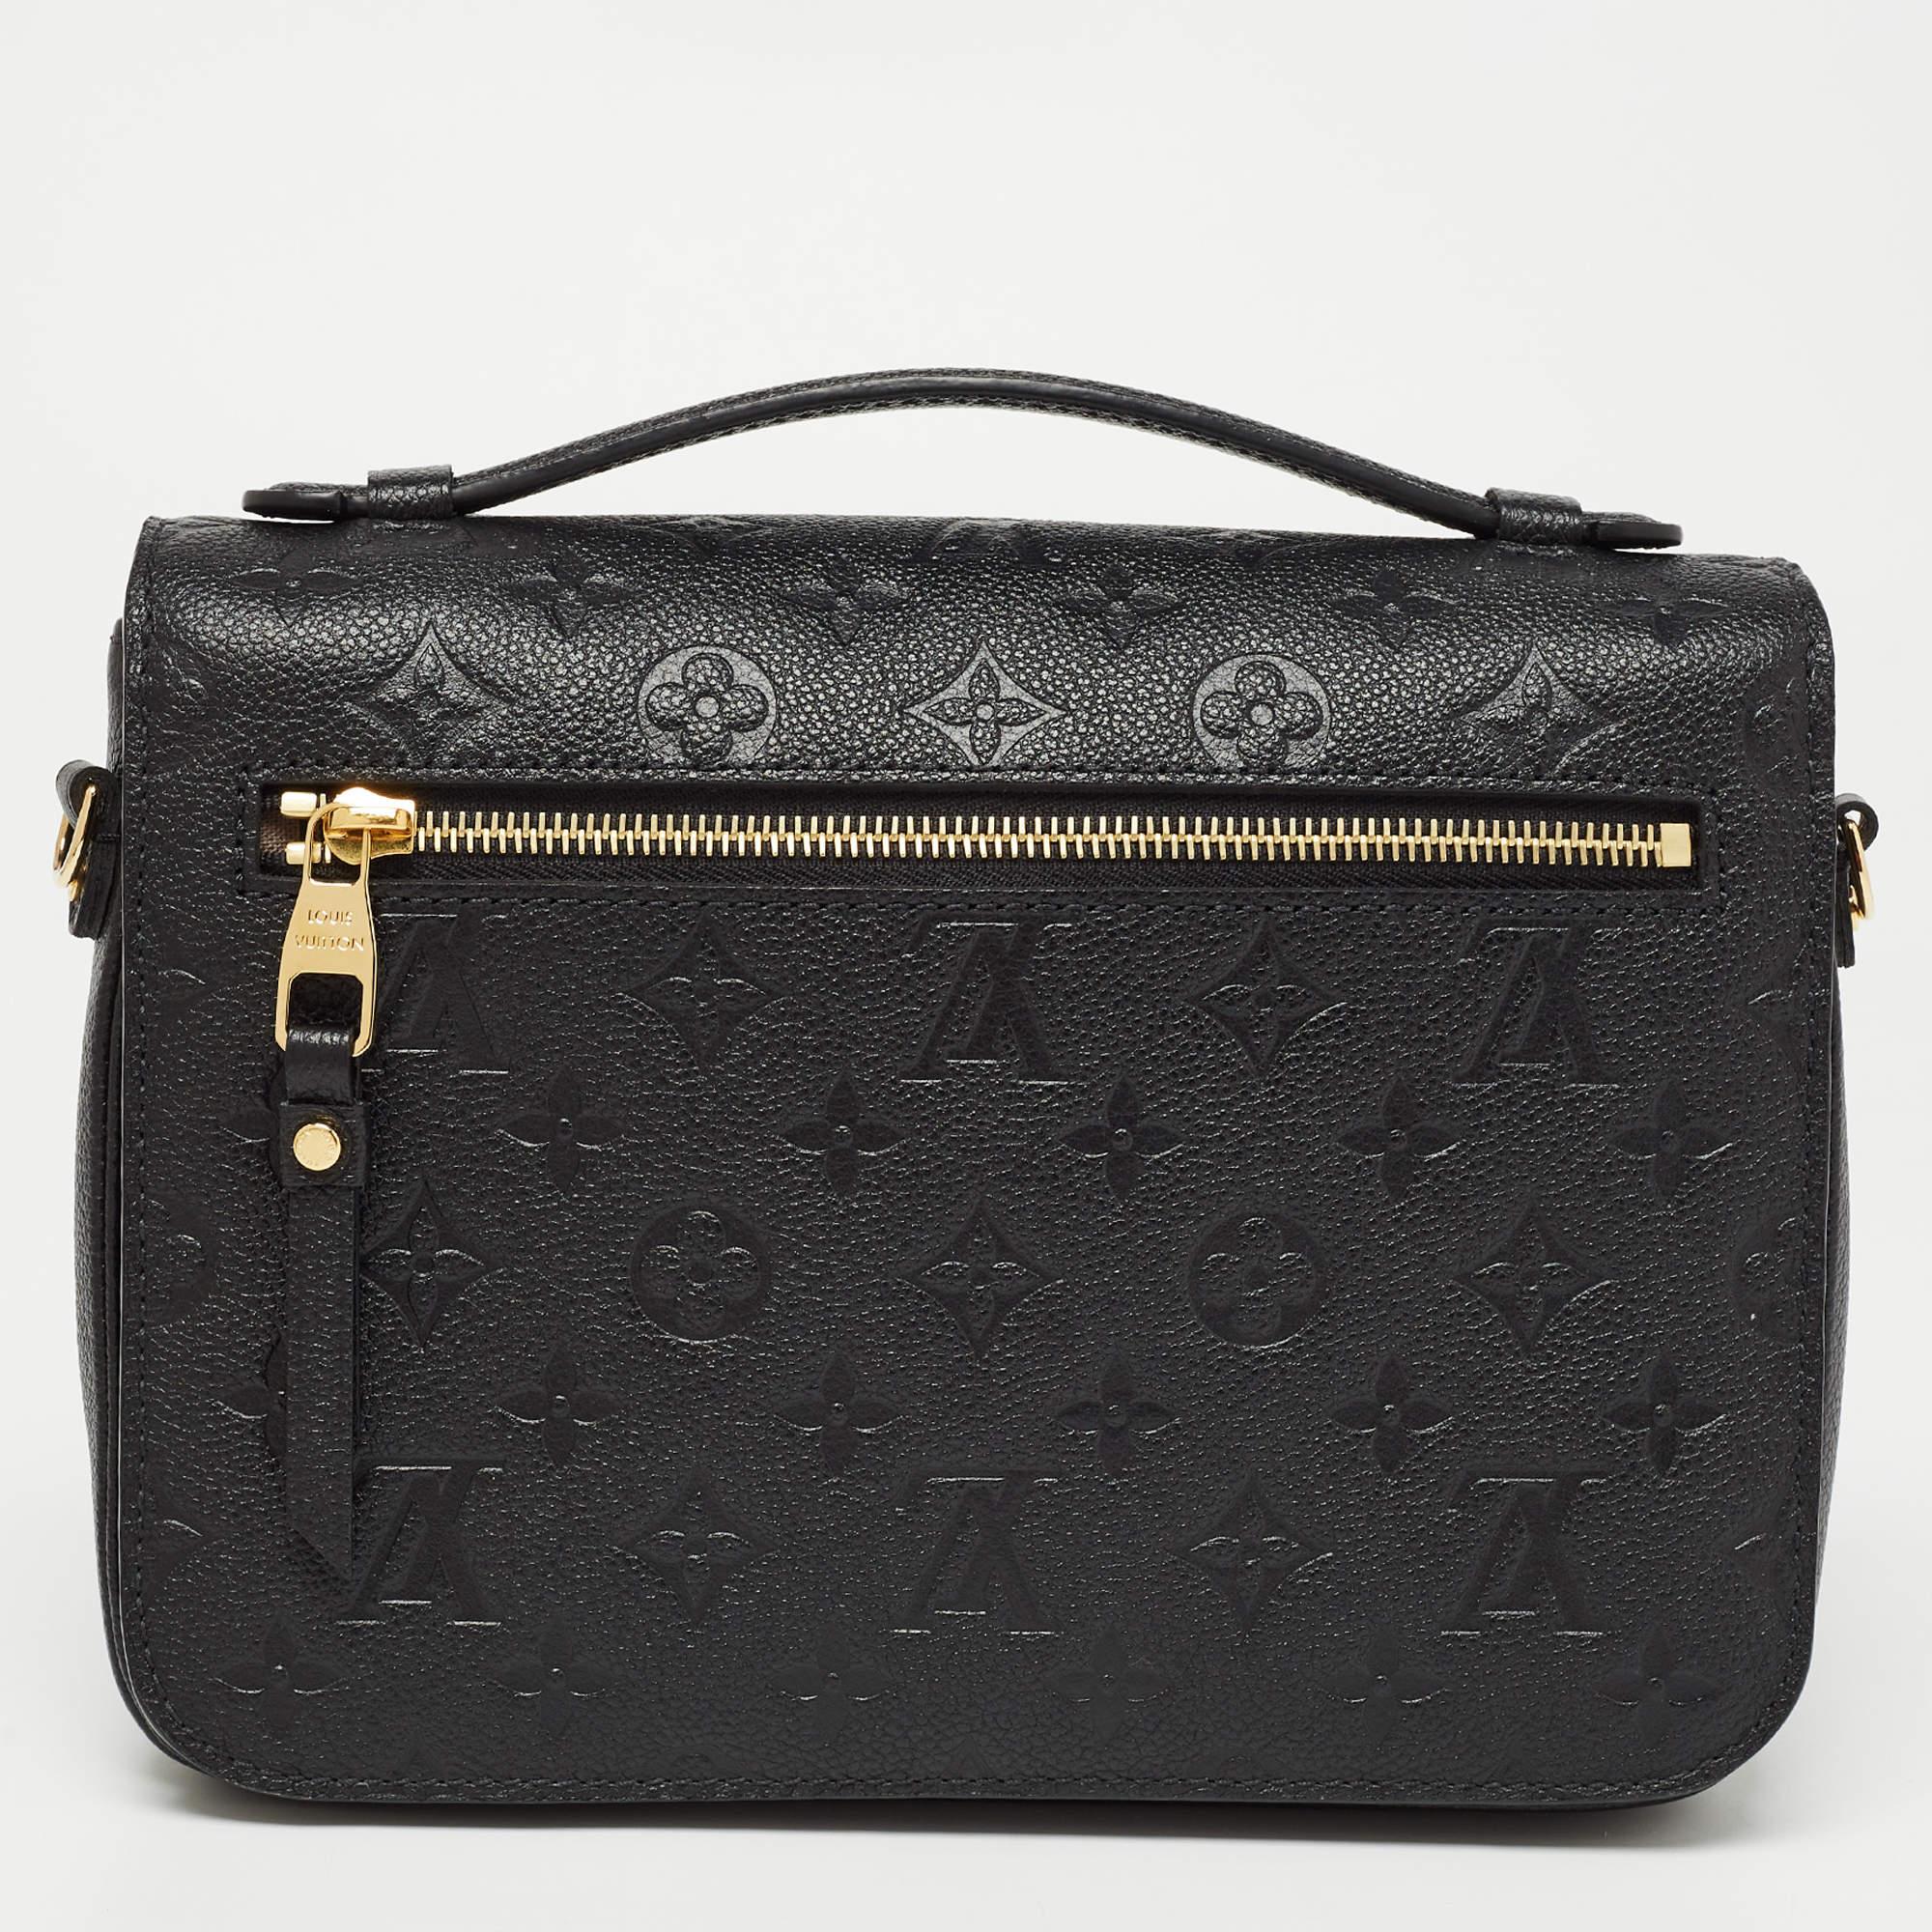 Louis Vuitton's handbags are popular owing to their high style and functionality. This bag, like all their designs, is durable and stylish. Exuding a fine finish, the Pochette Metis bag is designed to give a luxurious experience. The interior has